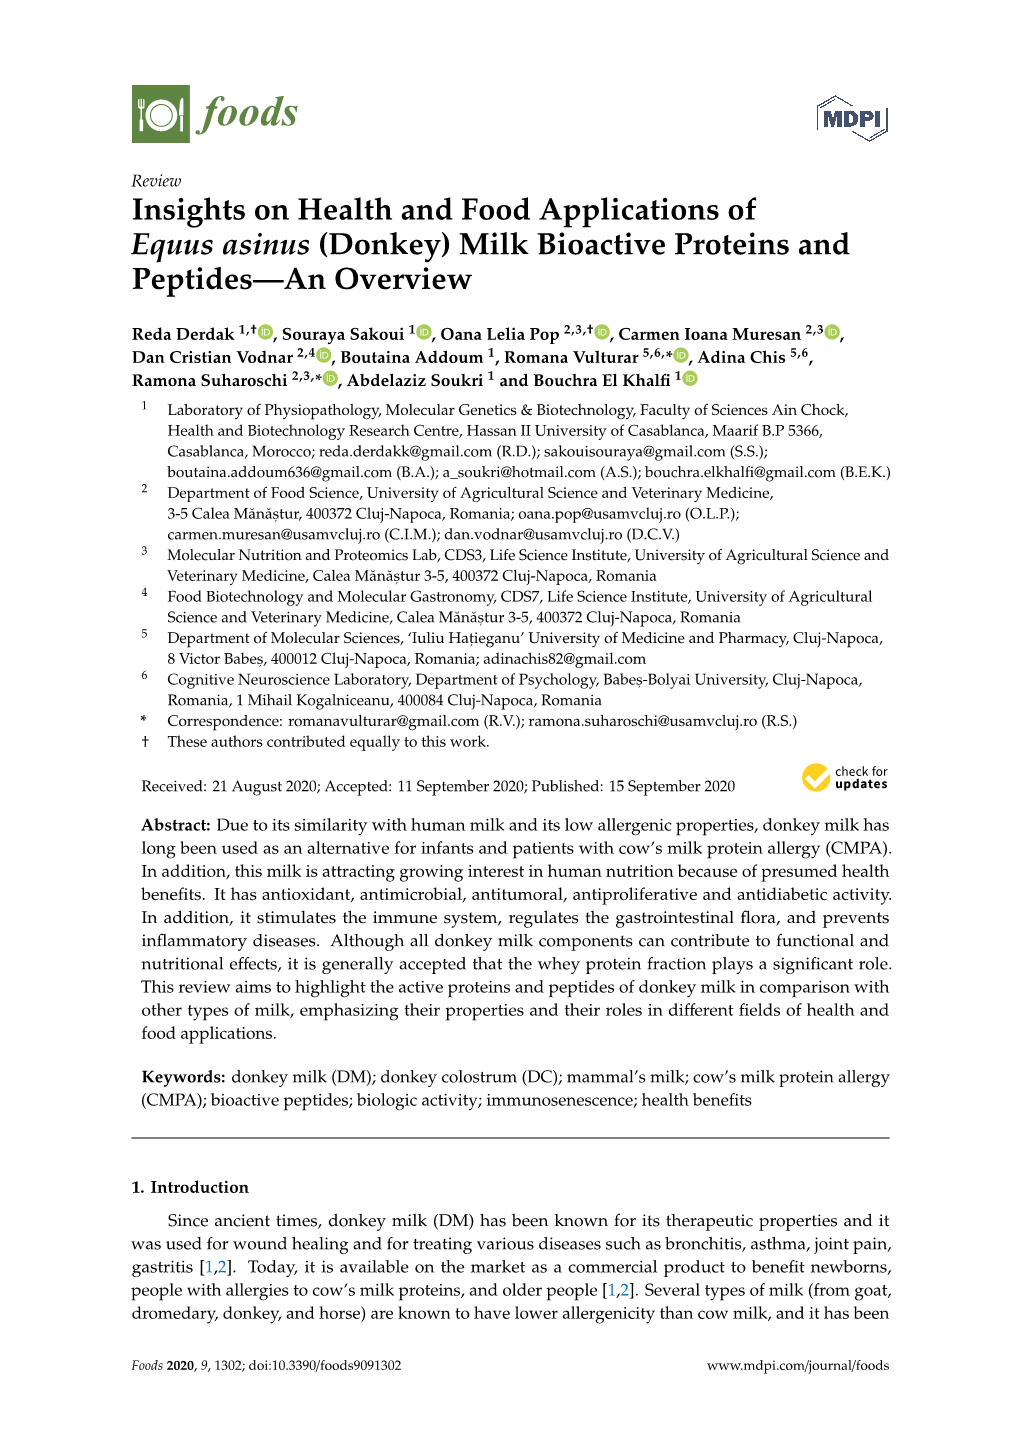 Donkey) Milk Bioactive Proteins and Peptides—An Overview